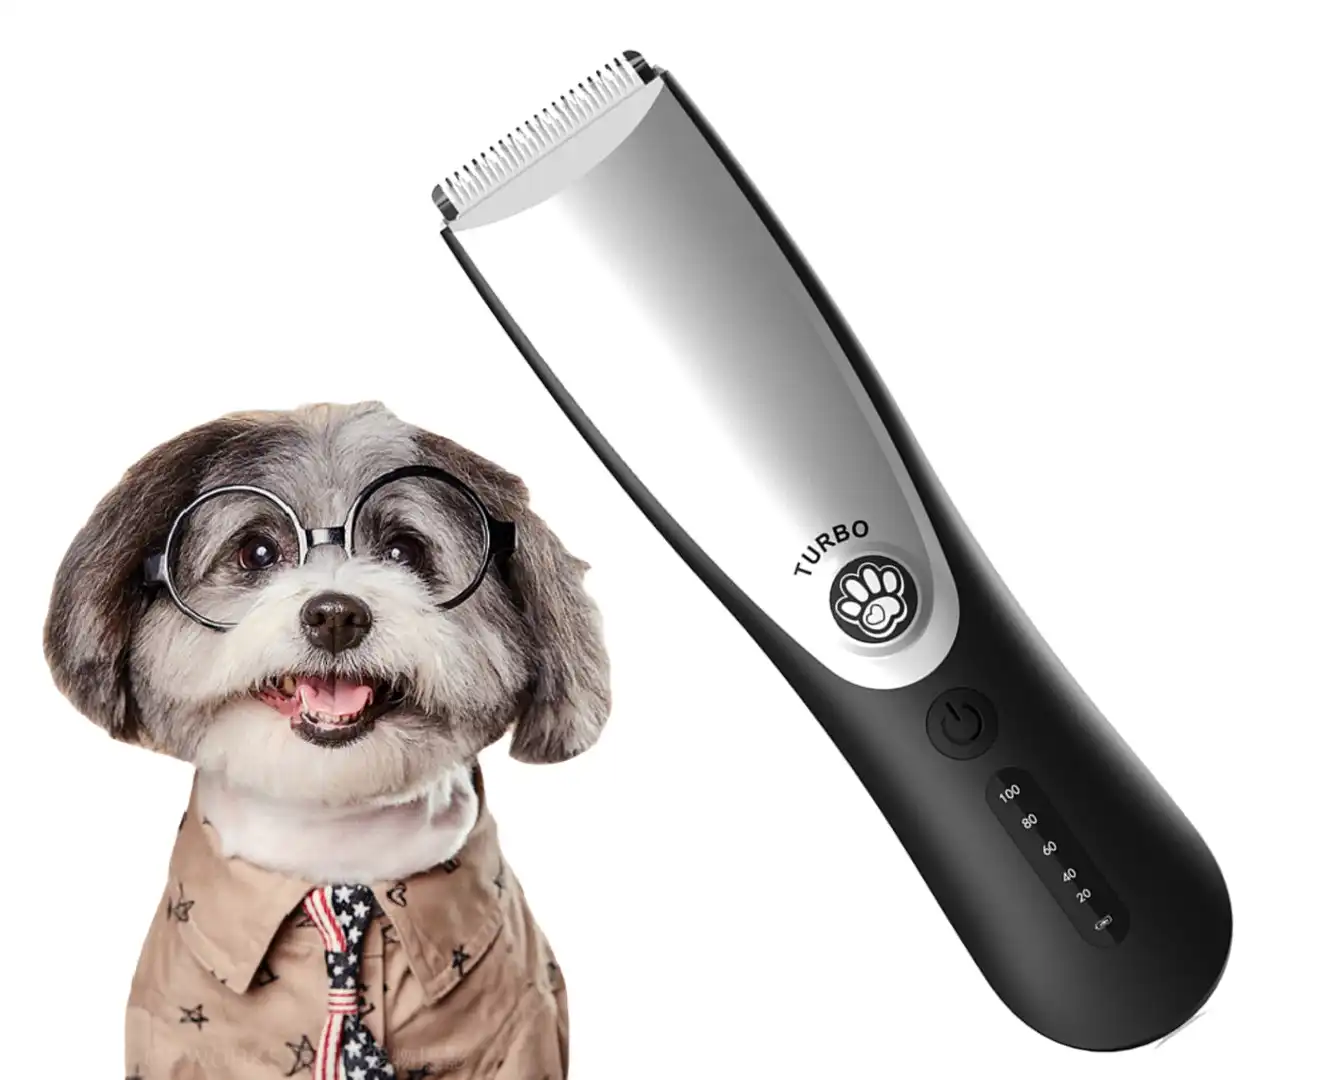 Professional Cordless Pet/Dog Trimmer and Clipper Grooming Kit For Home